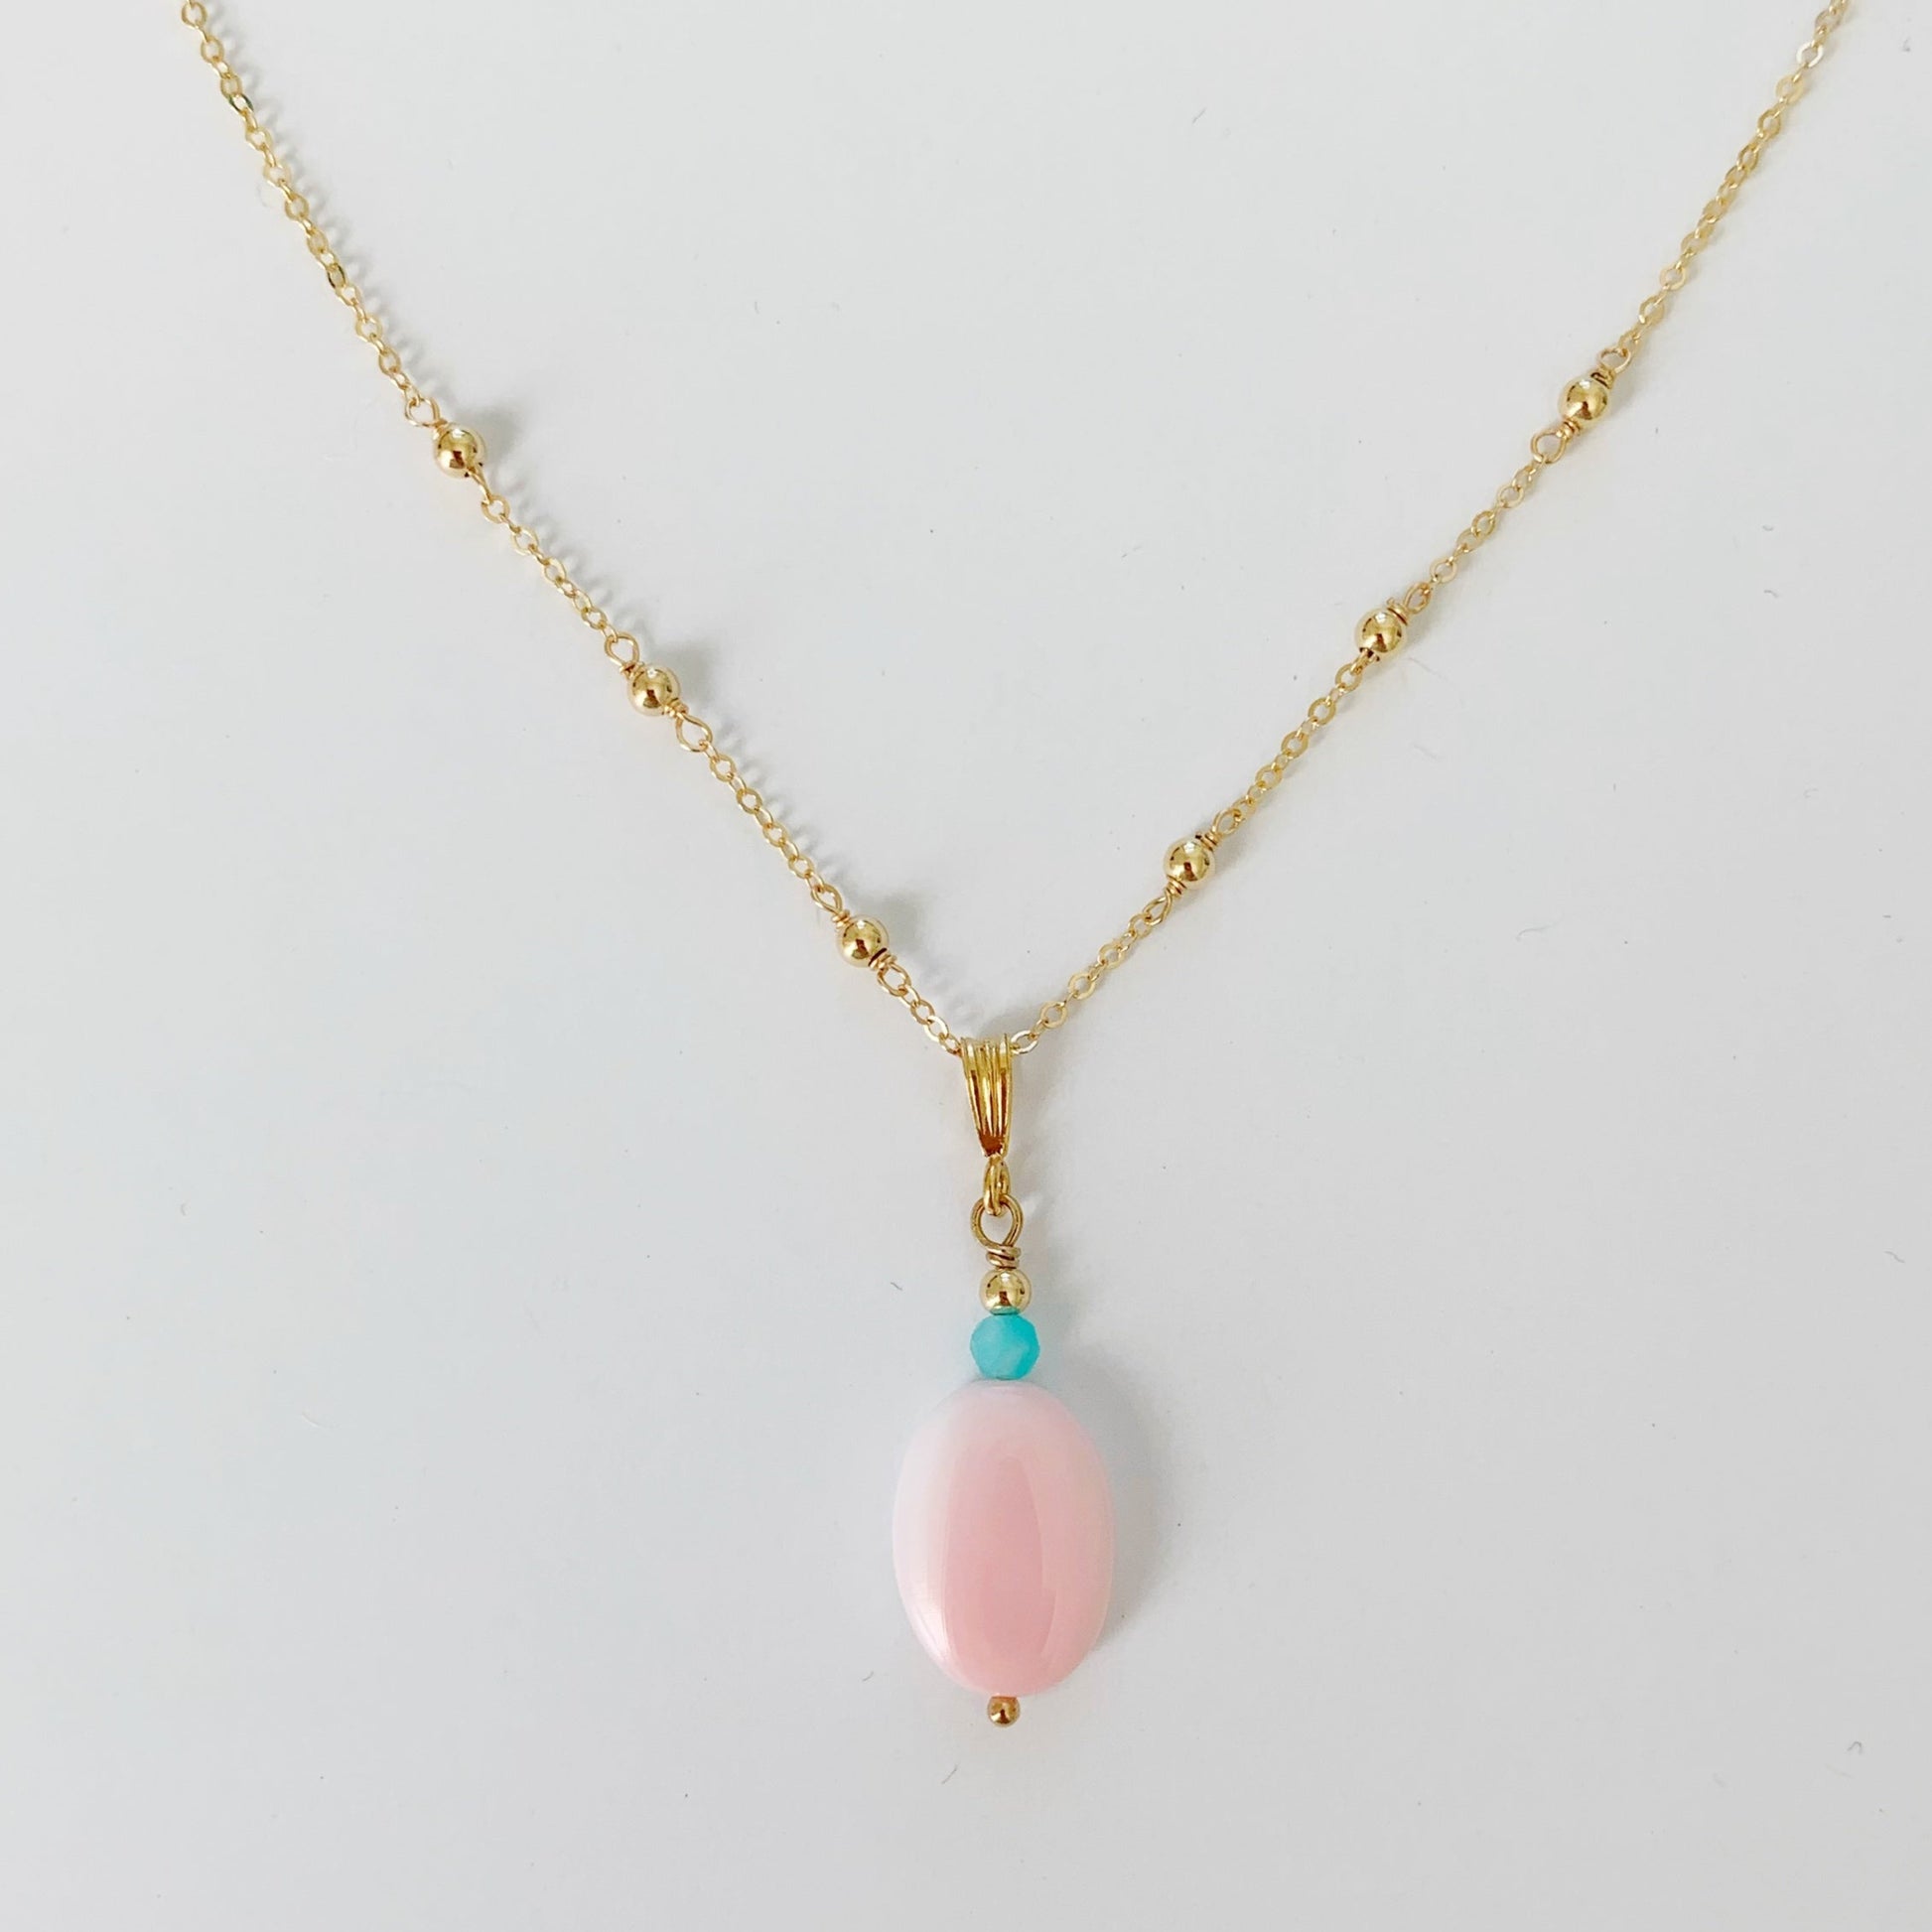 the sanibel necklace by mermaids and madeleines is created with an oval pink conch shell bead and amazonite bead to compliment suspended on a 14k gold filled dainty chain. this necklace is photographed on a white surface